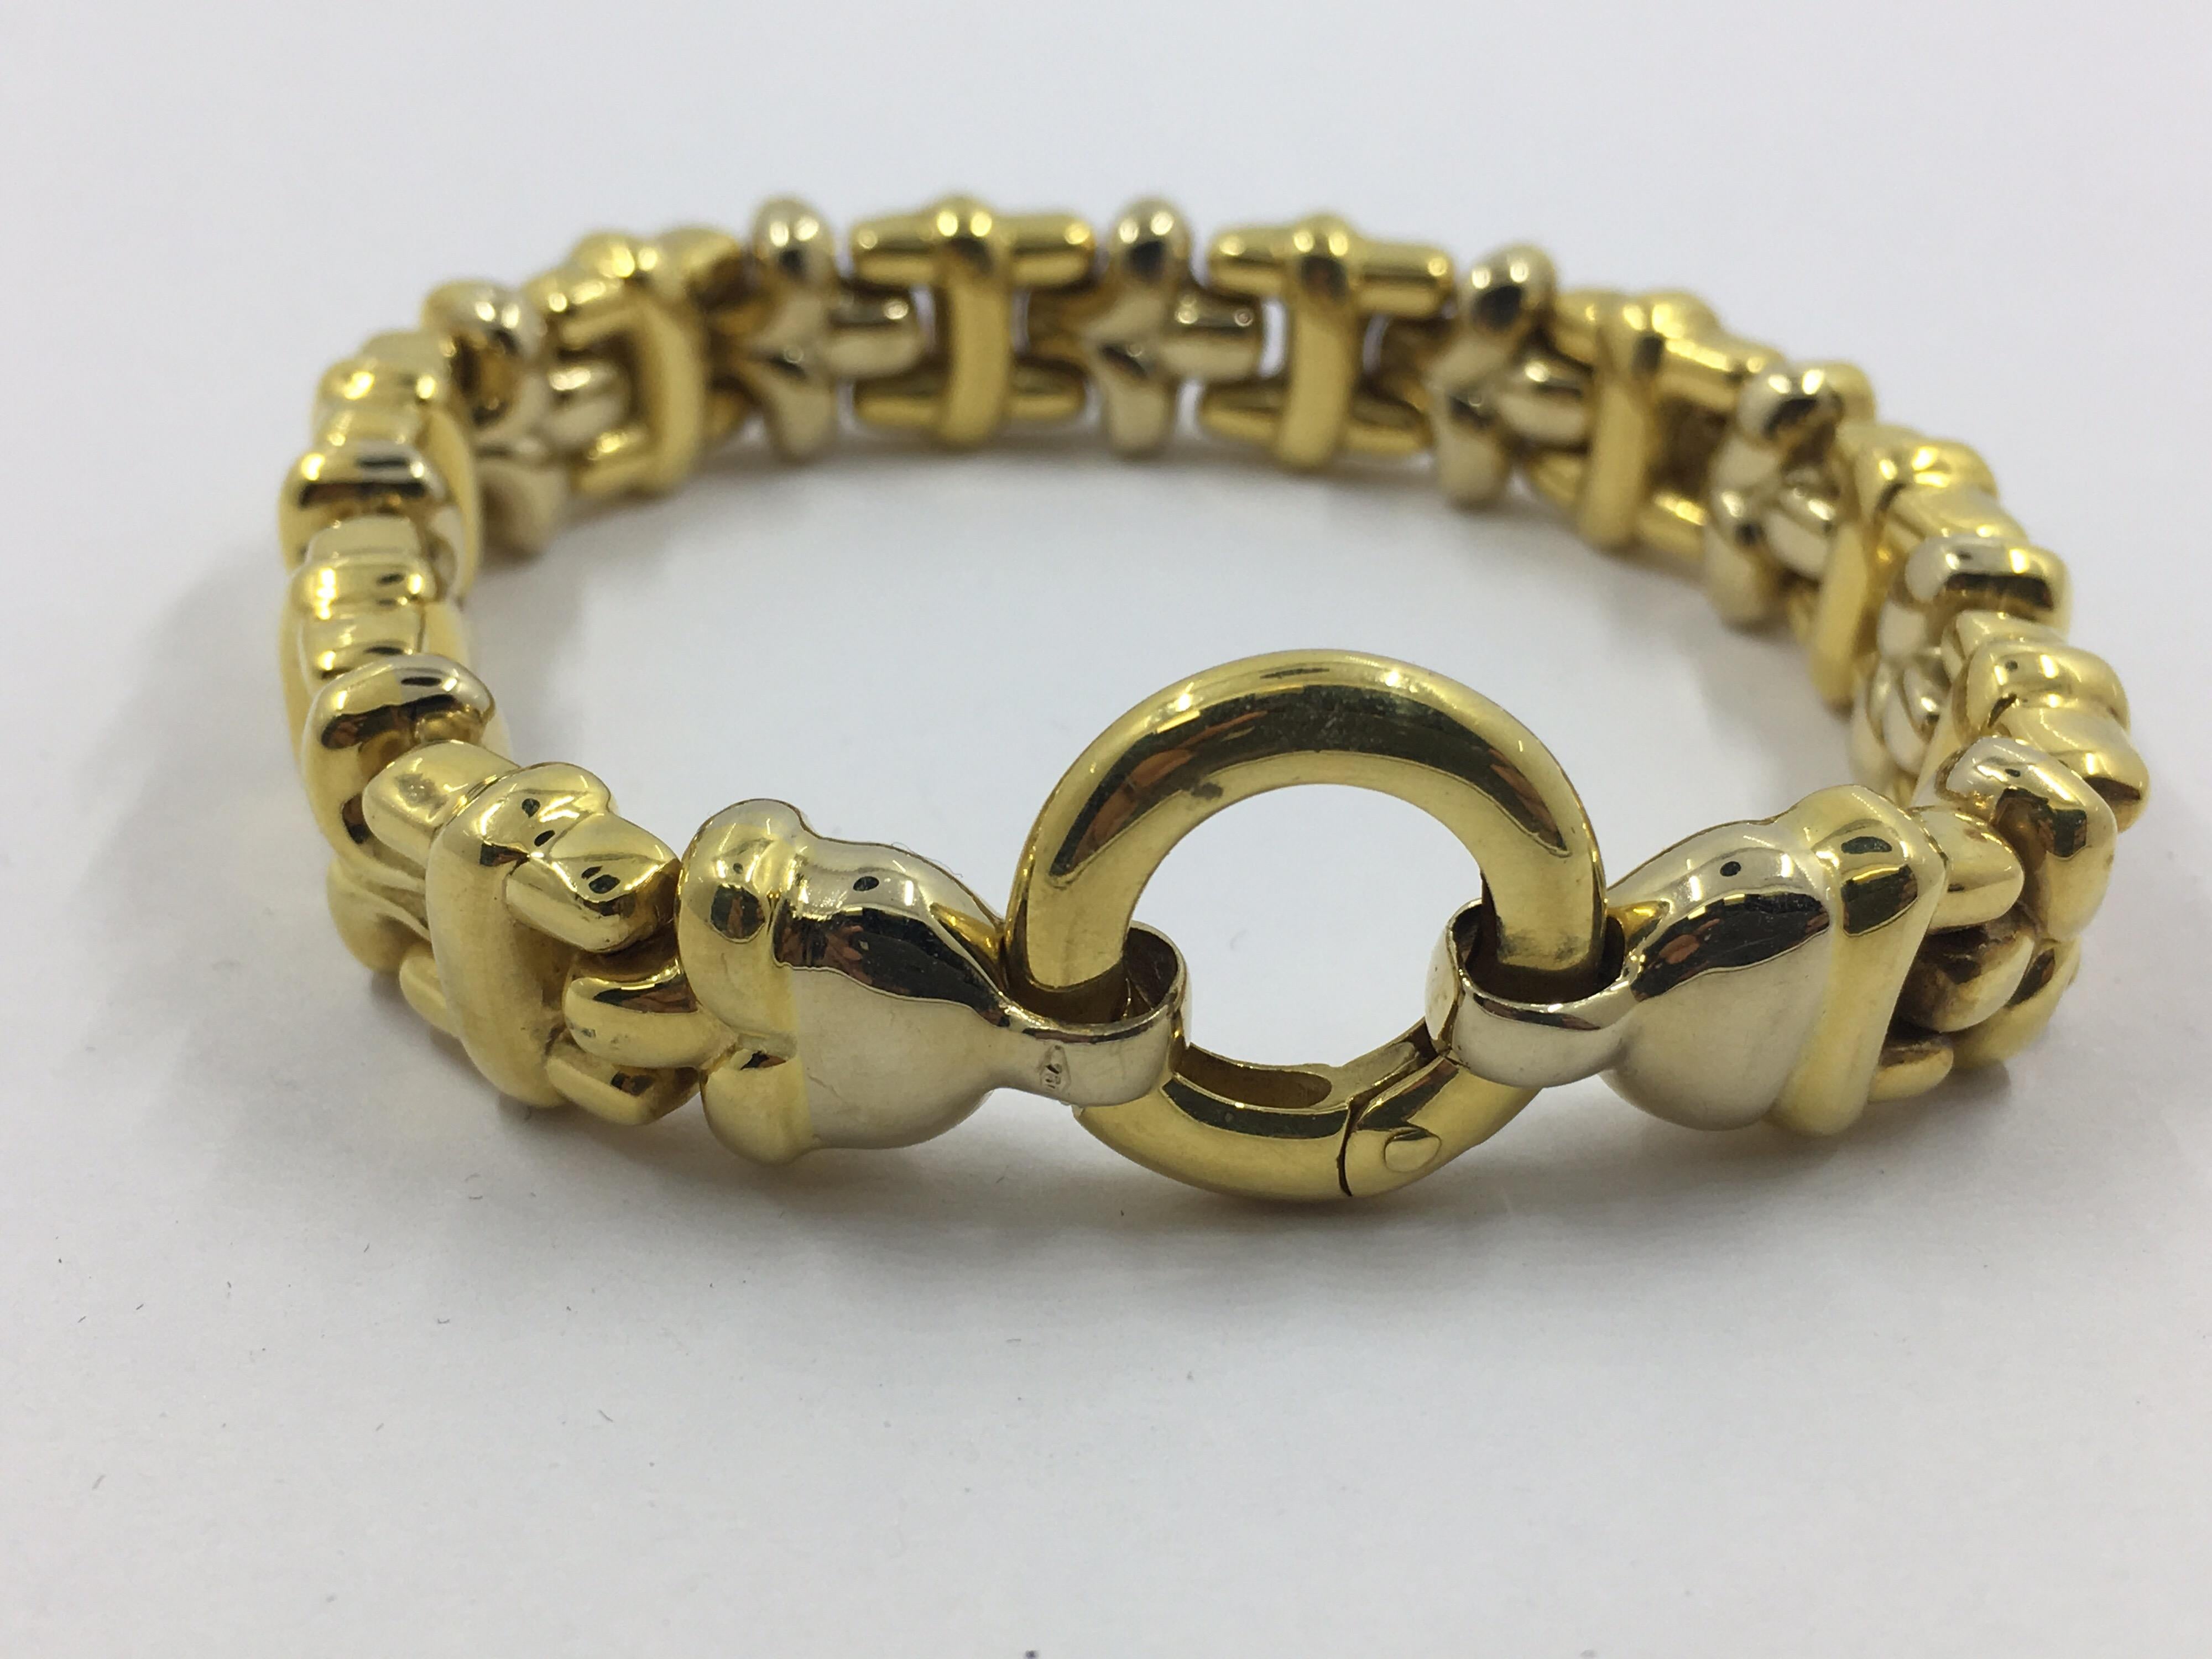 11-10134
18 Kt White and Yellow Gold Link Bracelet 
made in Italy 
32.60 grams